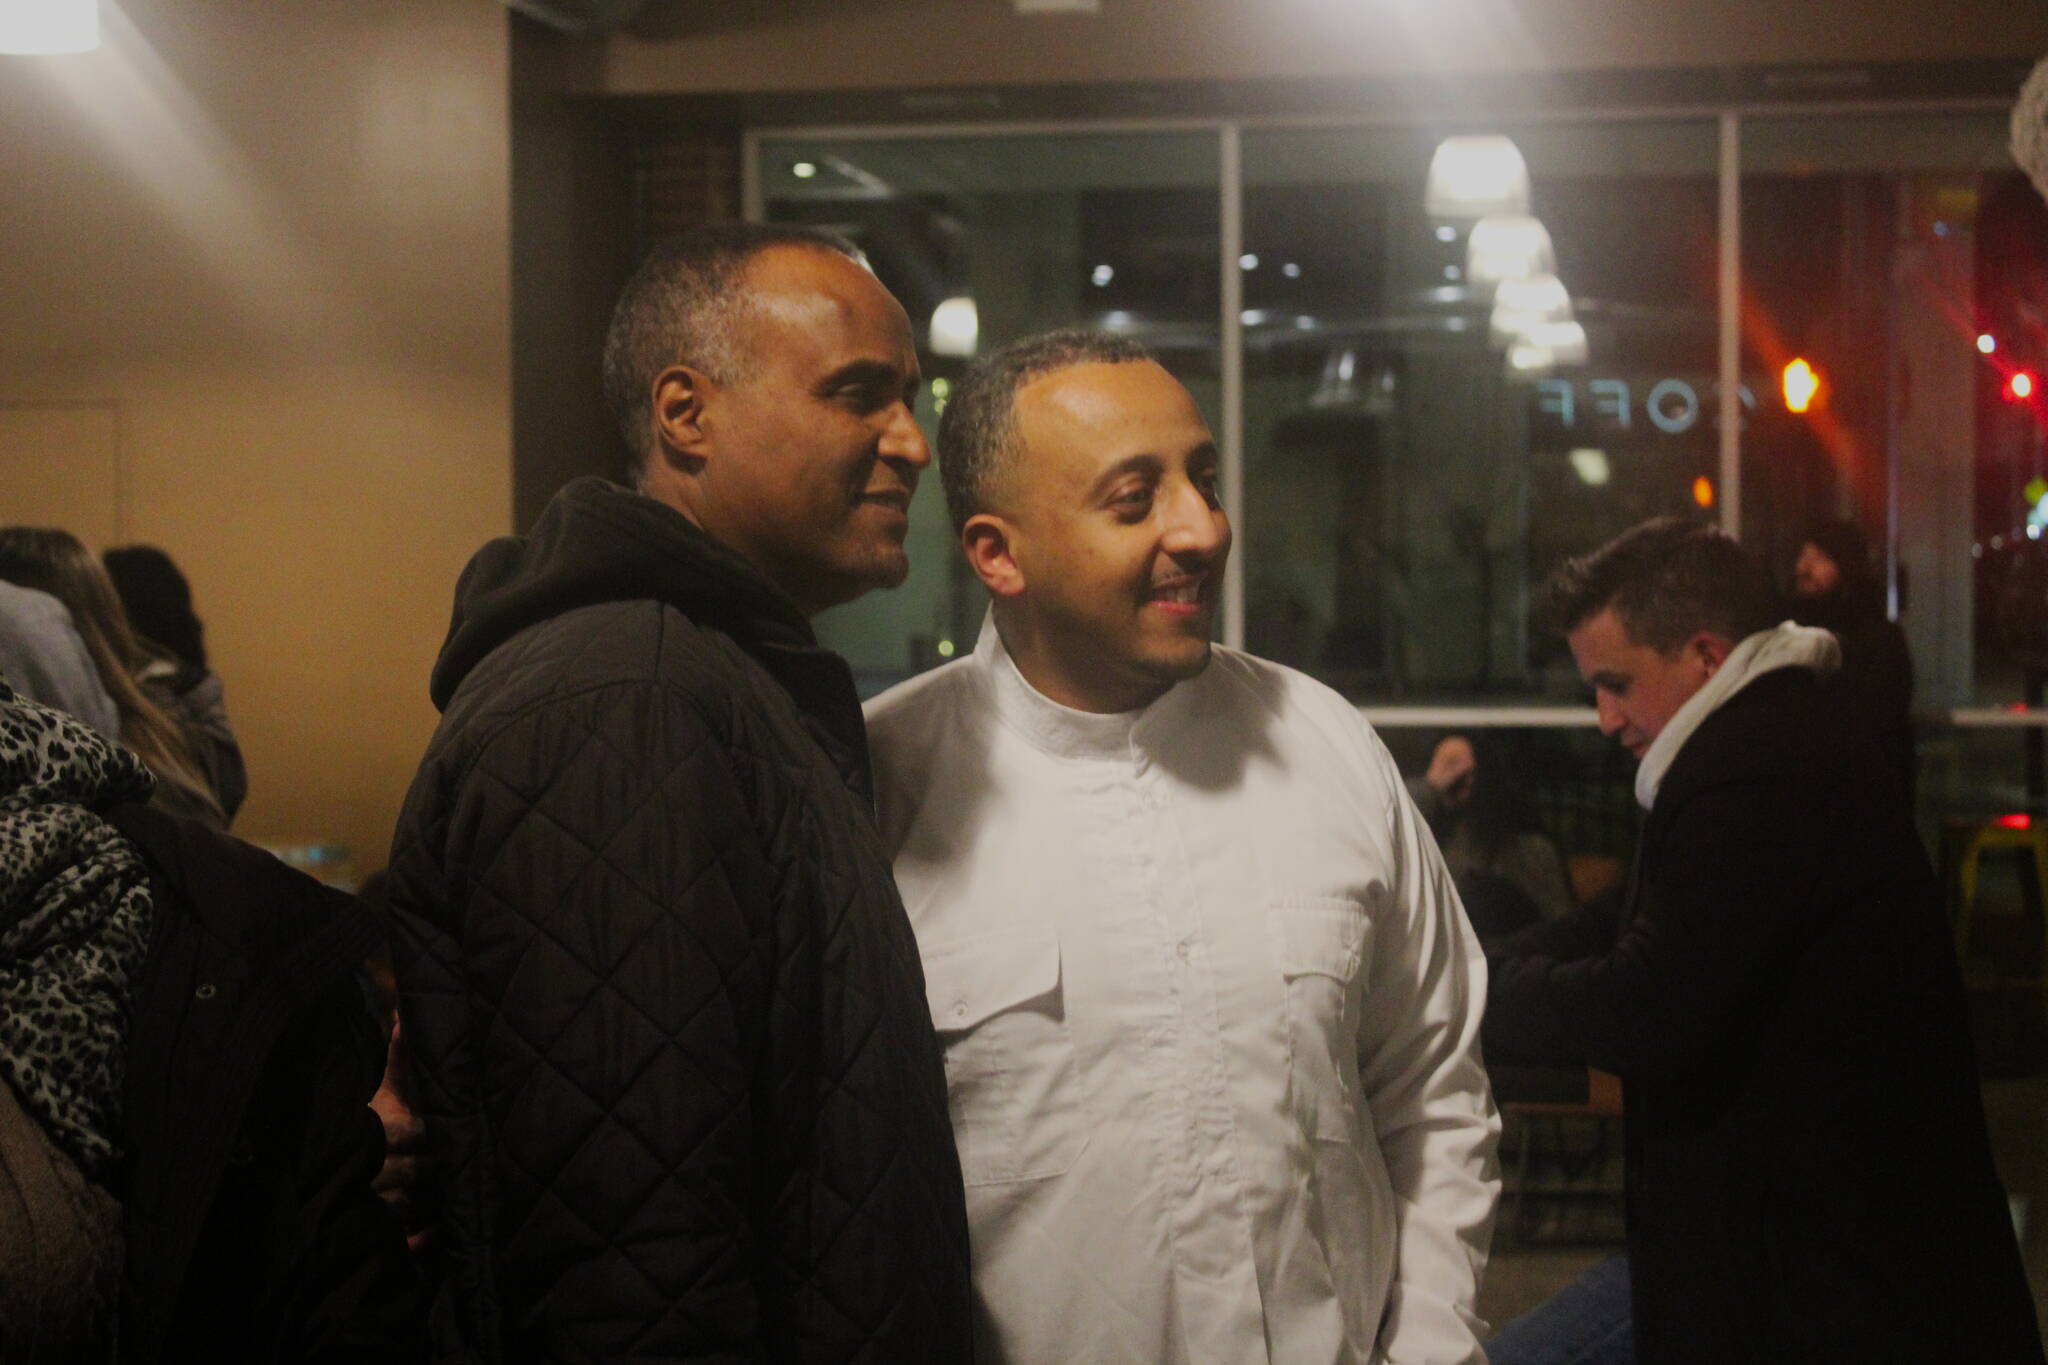 Efrem Fesaha (right) poses for pictures at Boon Boona’s five-year celebration party. (Photo by Bailey Jo Josie/Sound Publishing)